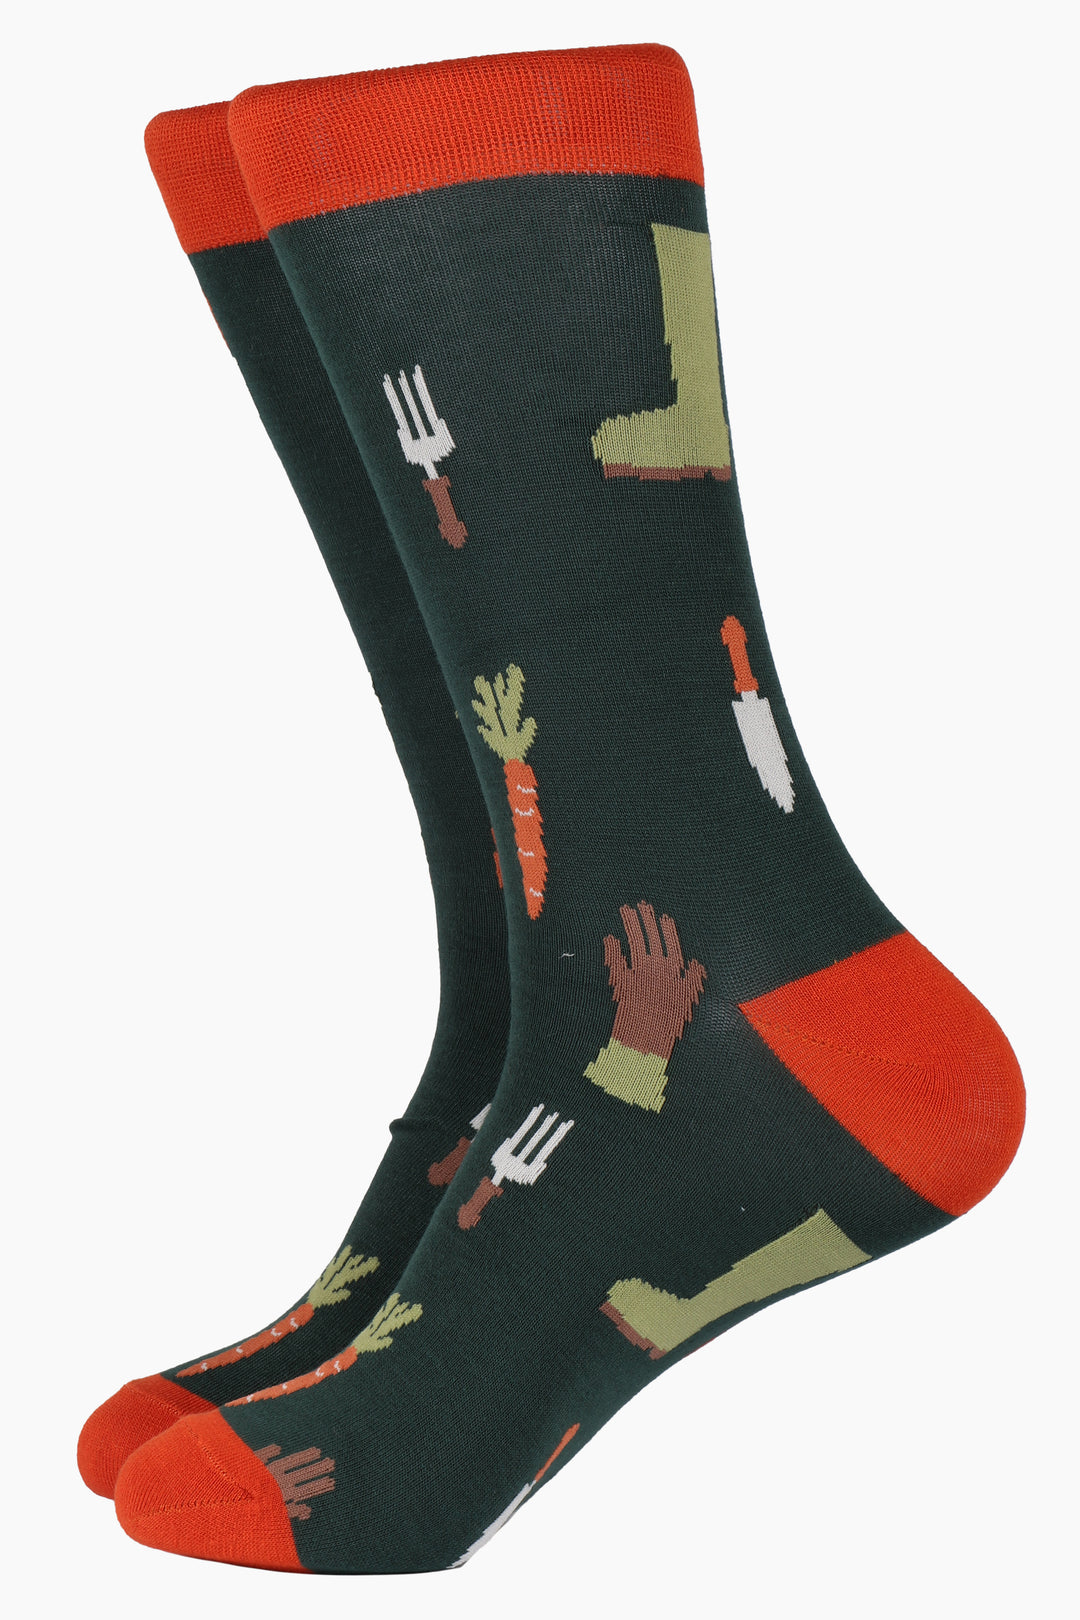 green bamboo socks with an orange heel, toe and cuff with an all over pattern of orange carrots, brown gardening gloves and garden tools